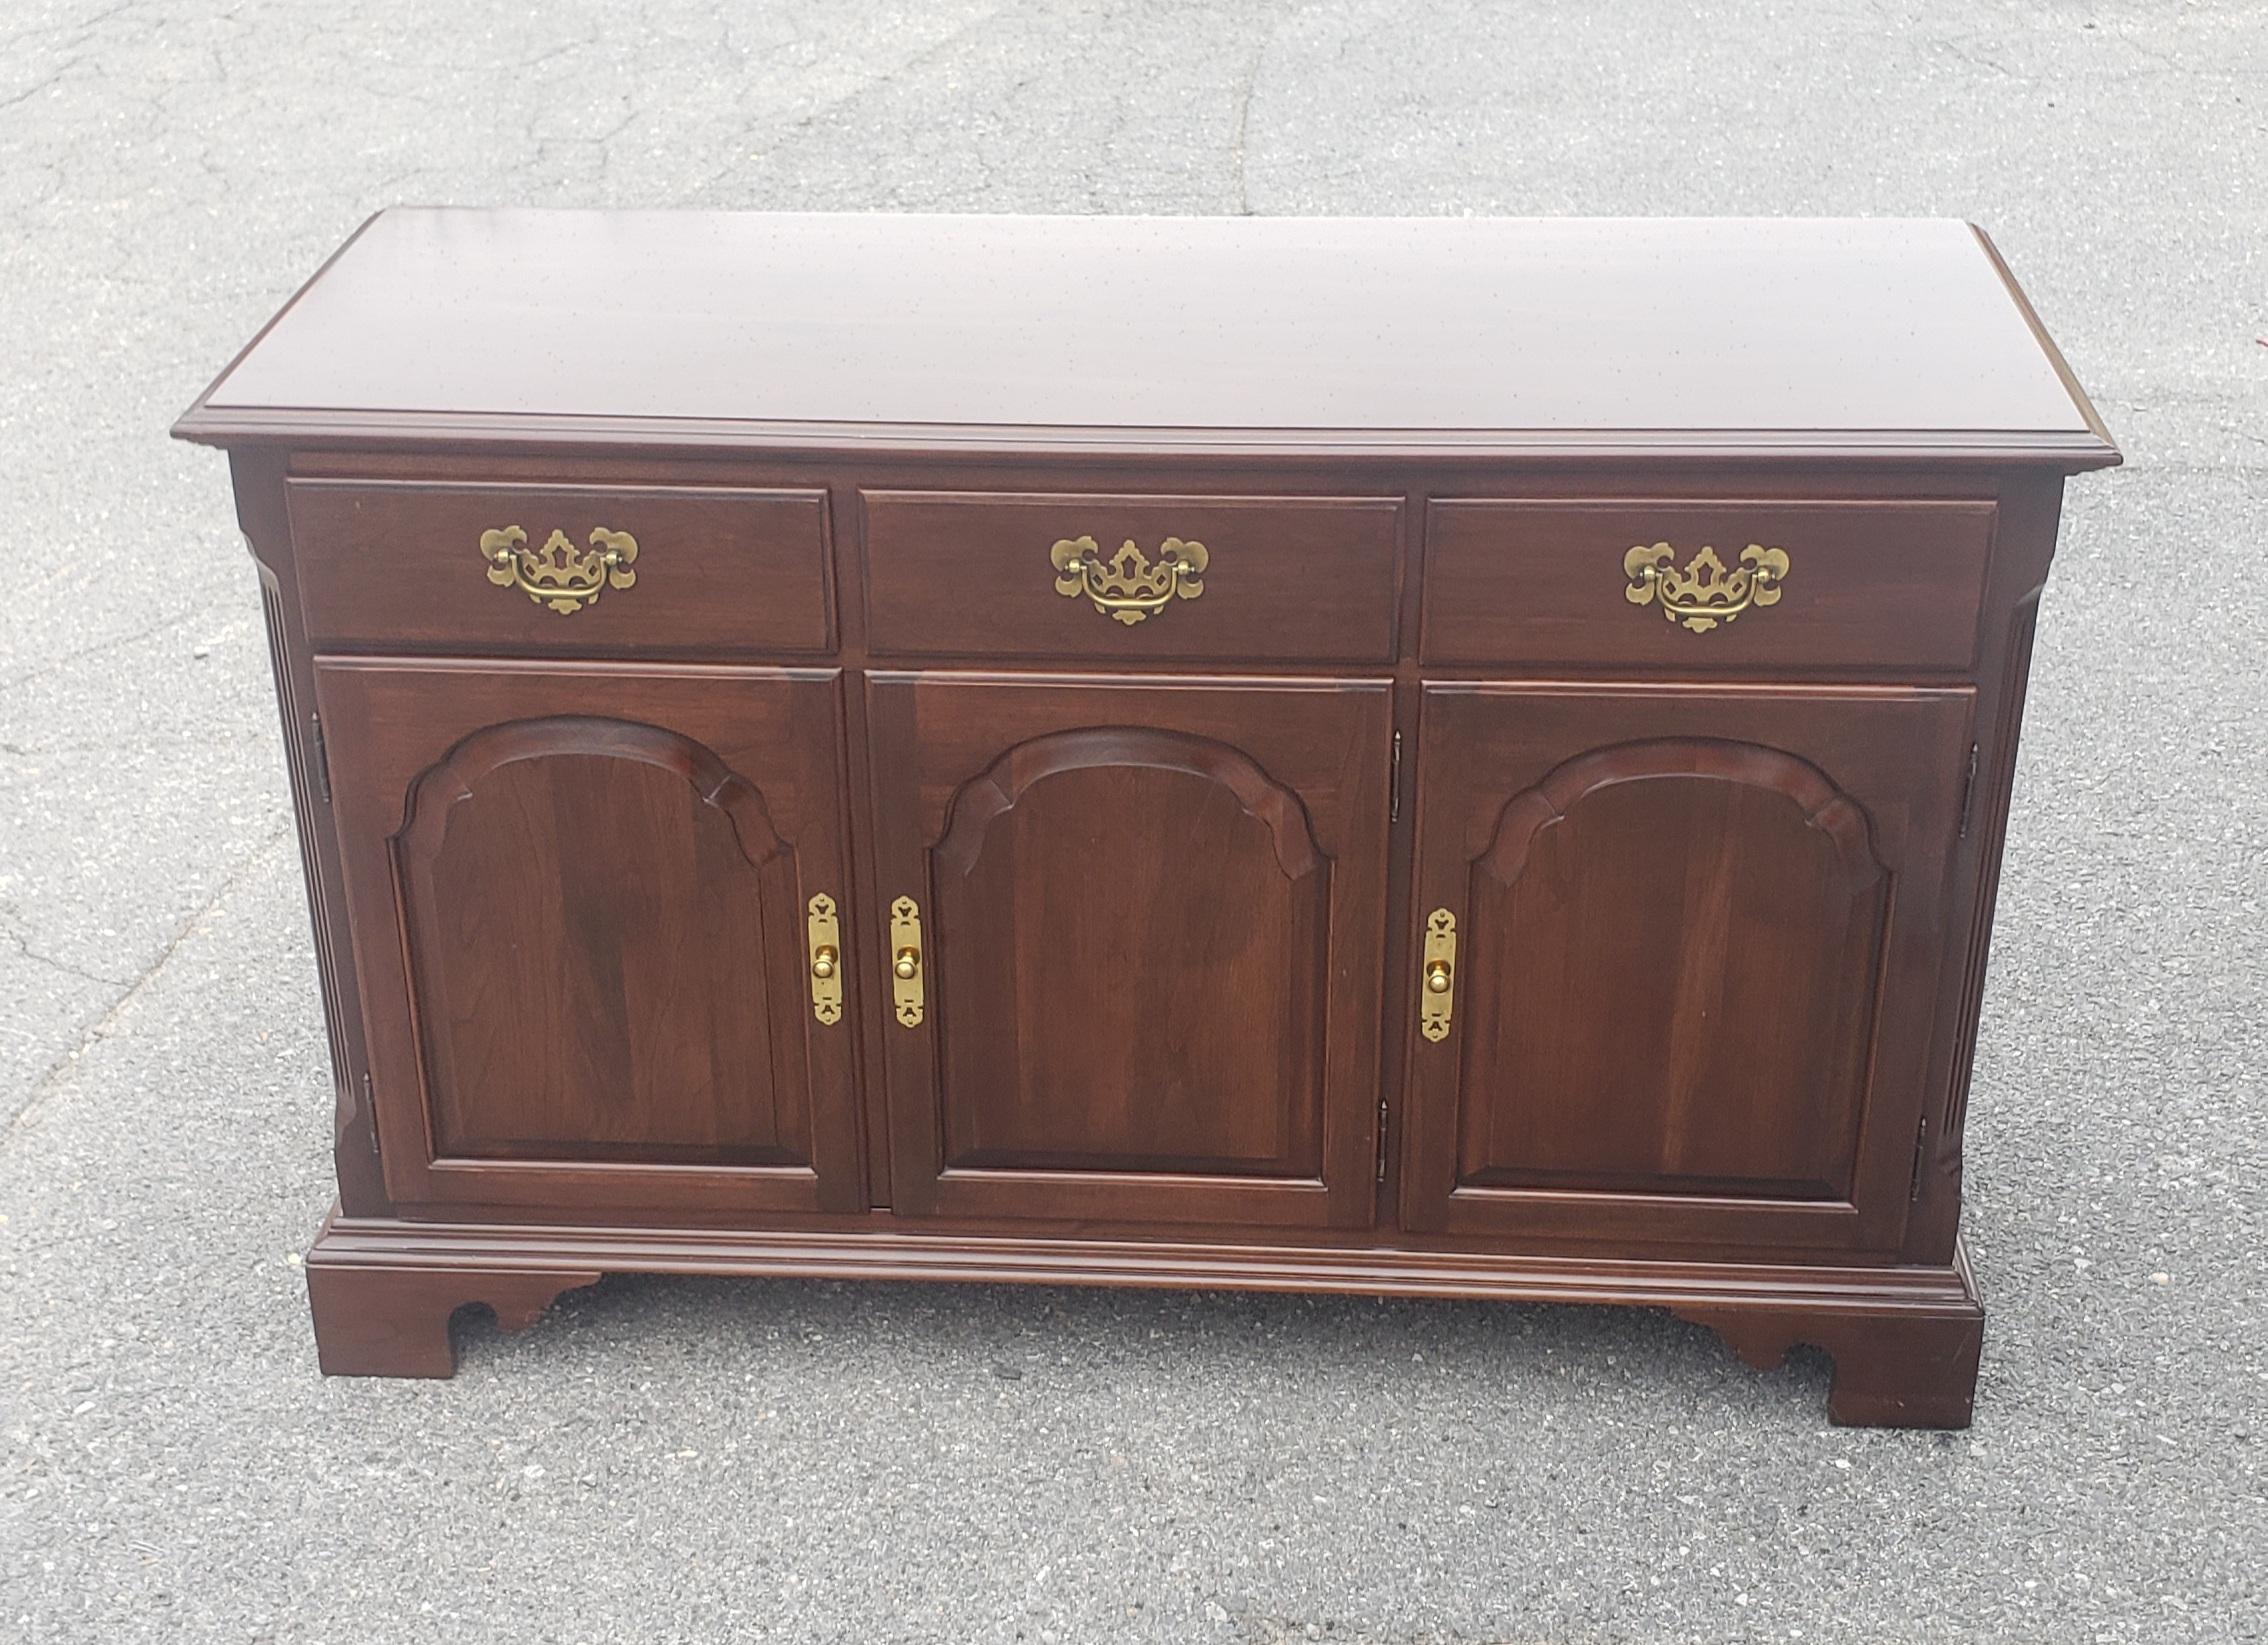 A chippendale style panelized doors buffet / credenza. Made out of dark solid cherry. Features 3 top dovetail constructed drawers, with one drawer originally set up and lined with soft fabric for to better protect you flatware and silverware.
The